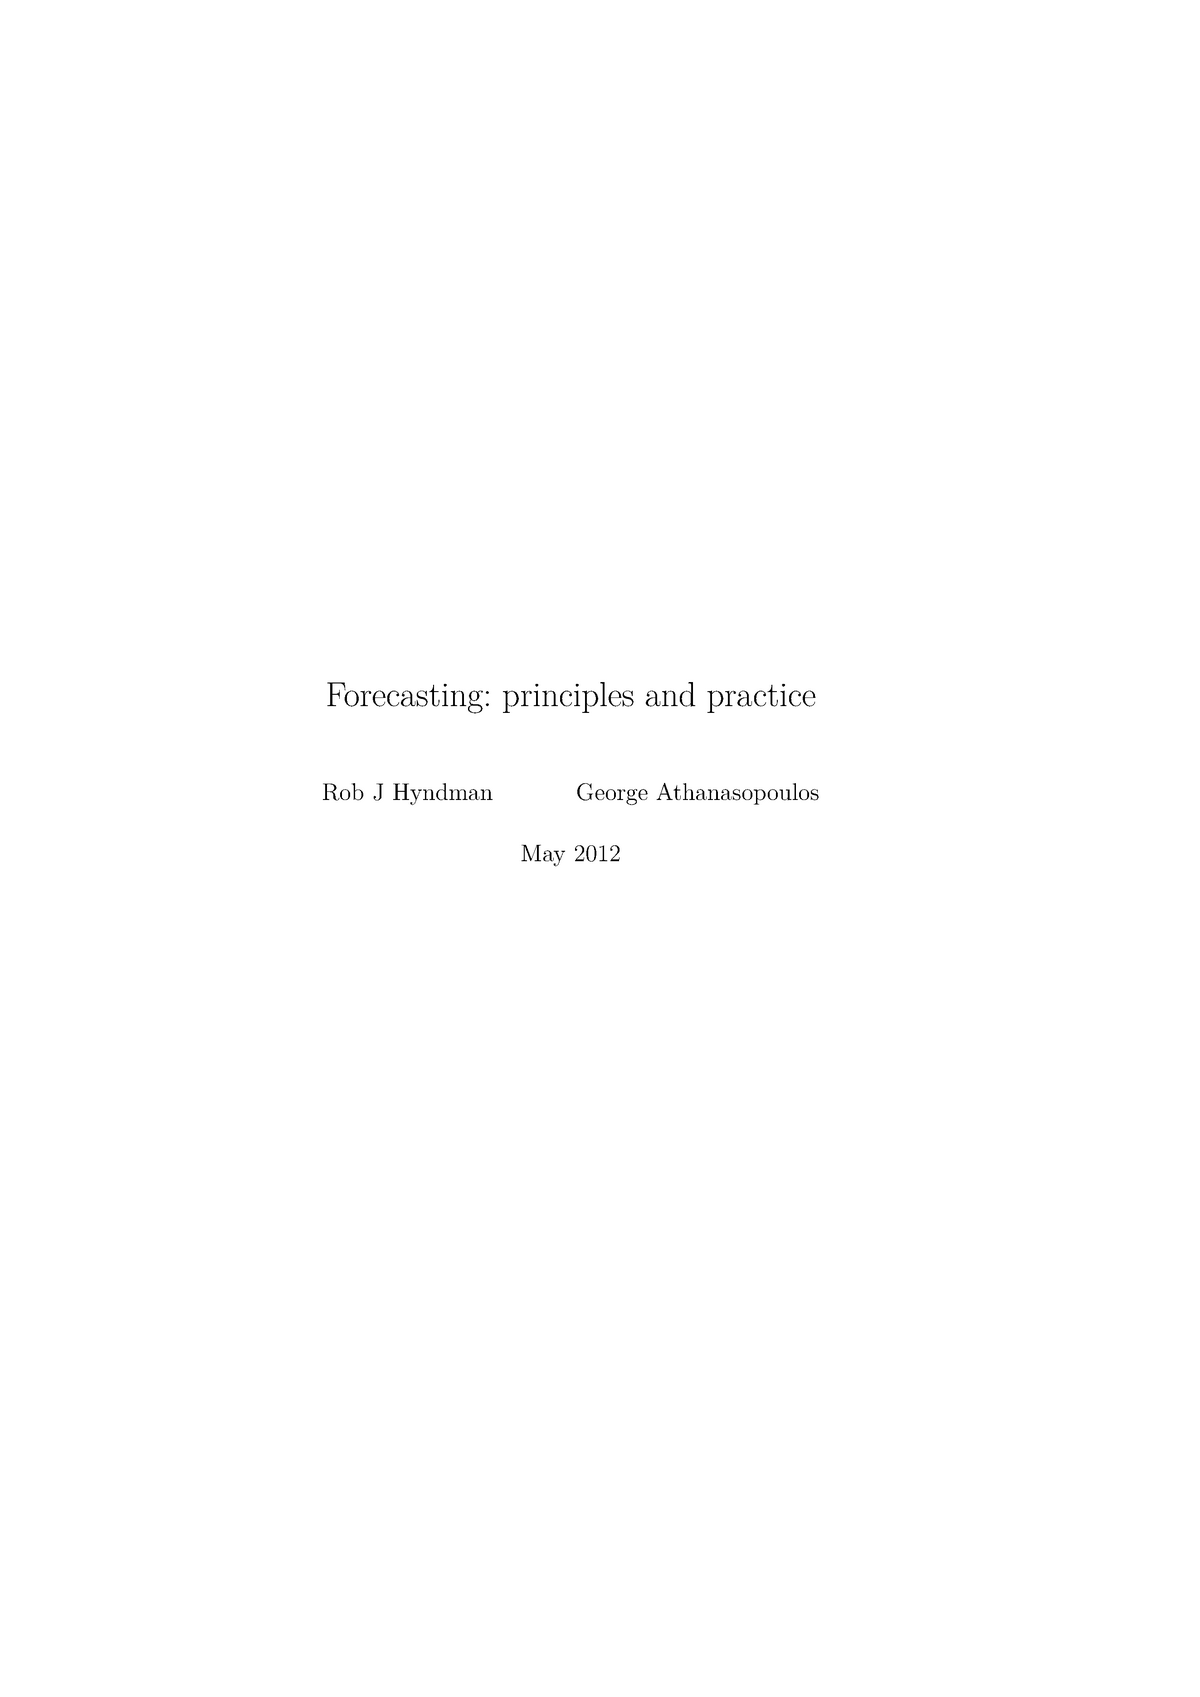 370370026 341045985 Forecasting and practice - Forecasting: principles and - StuDocu